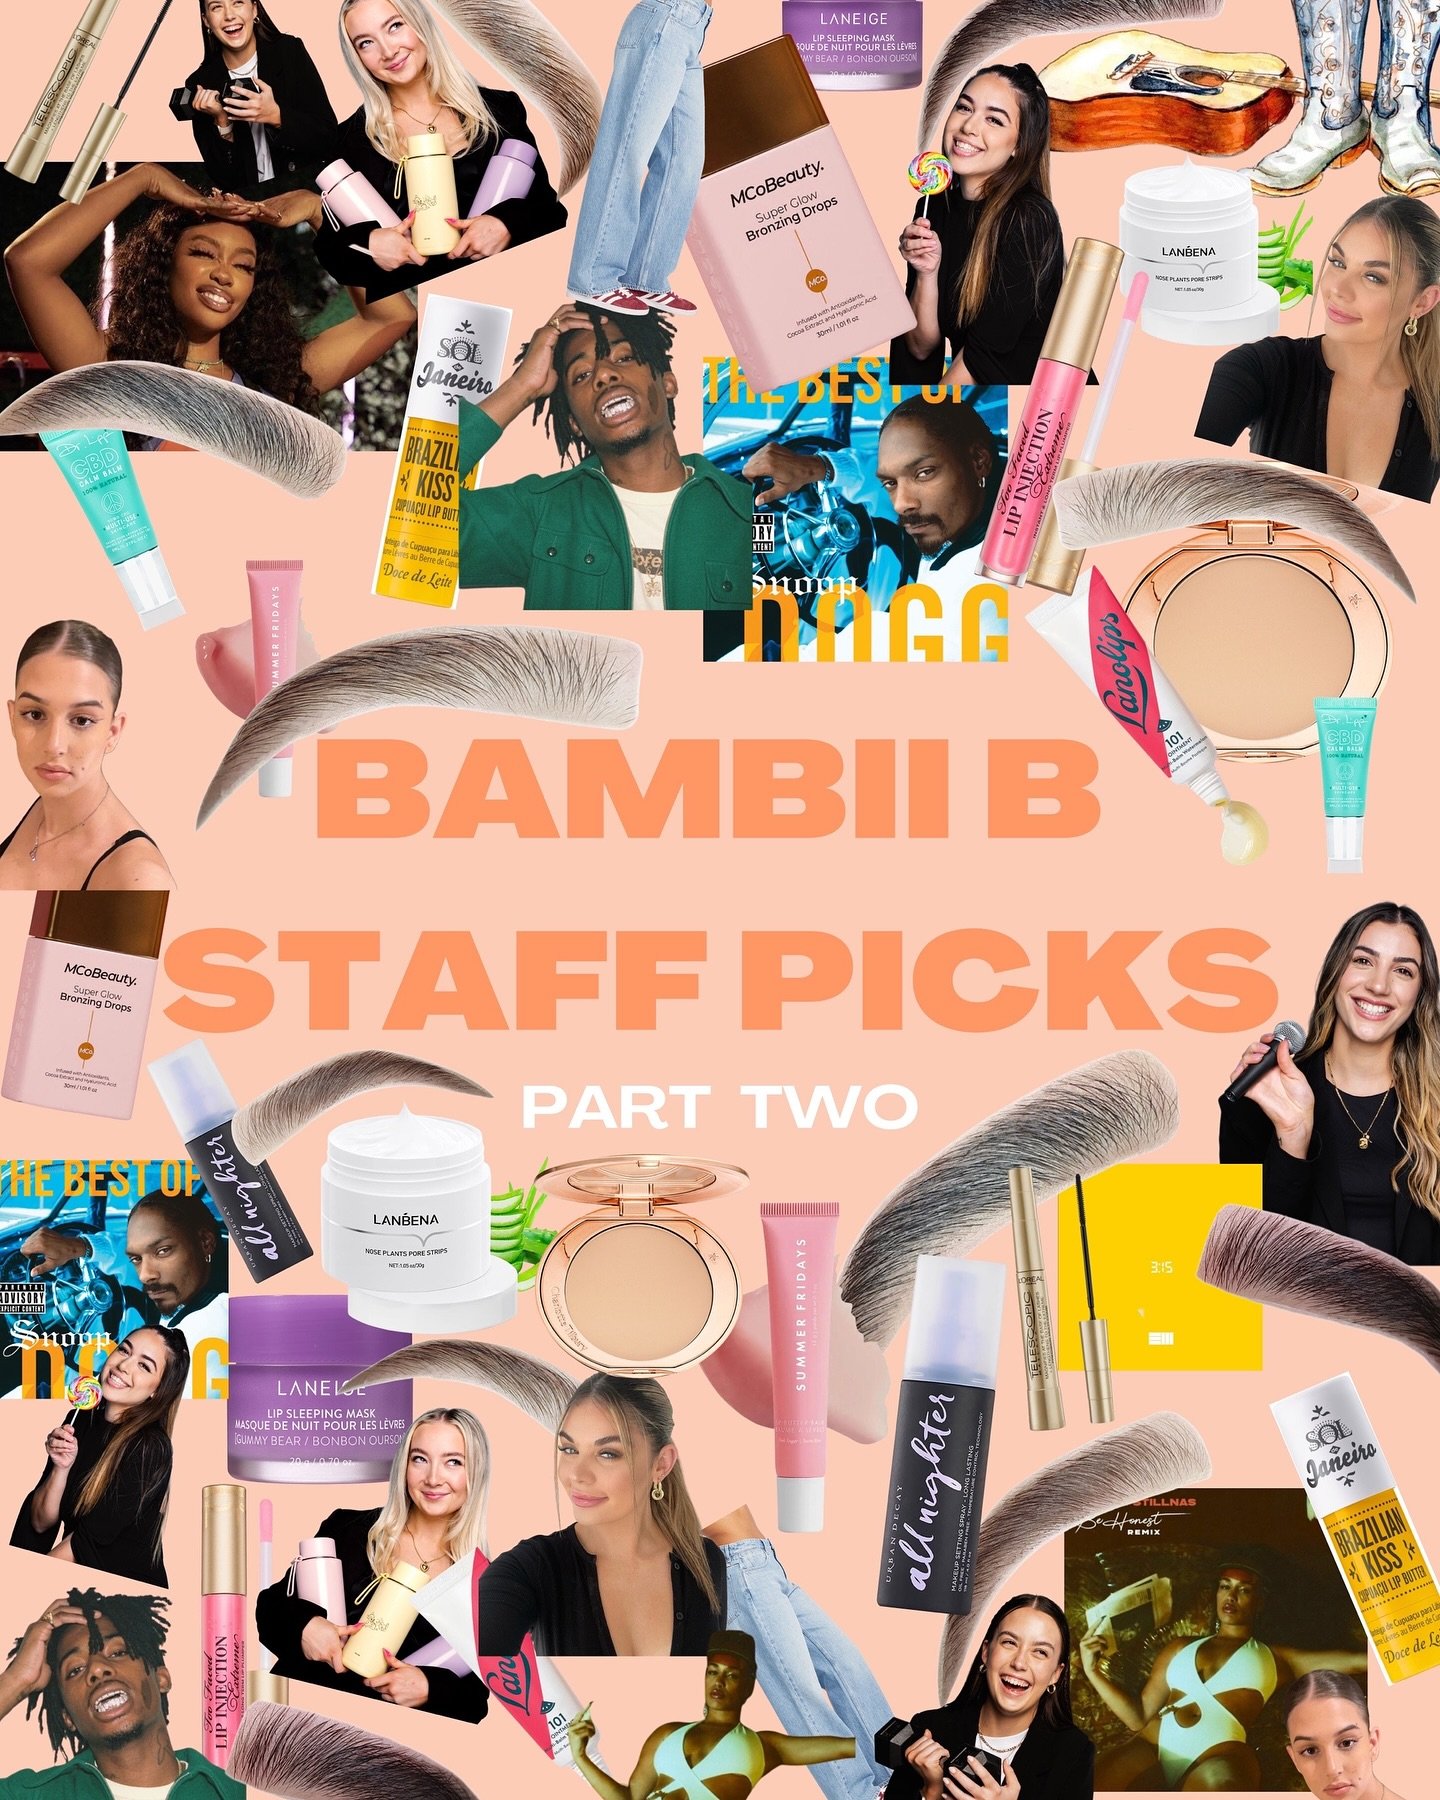 BAMBII BABES essentials - EDITION II 
Girlies, whose vibe best matches you??? Let us know what fave essential is missing from this list 👧👄💅💄🎀

&mdash;

#Bambiibrows #Bambiib #eyebrowstylist #Perthbrows #Perthbeauty #Eyebrows #tweezing #naturalbr